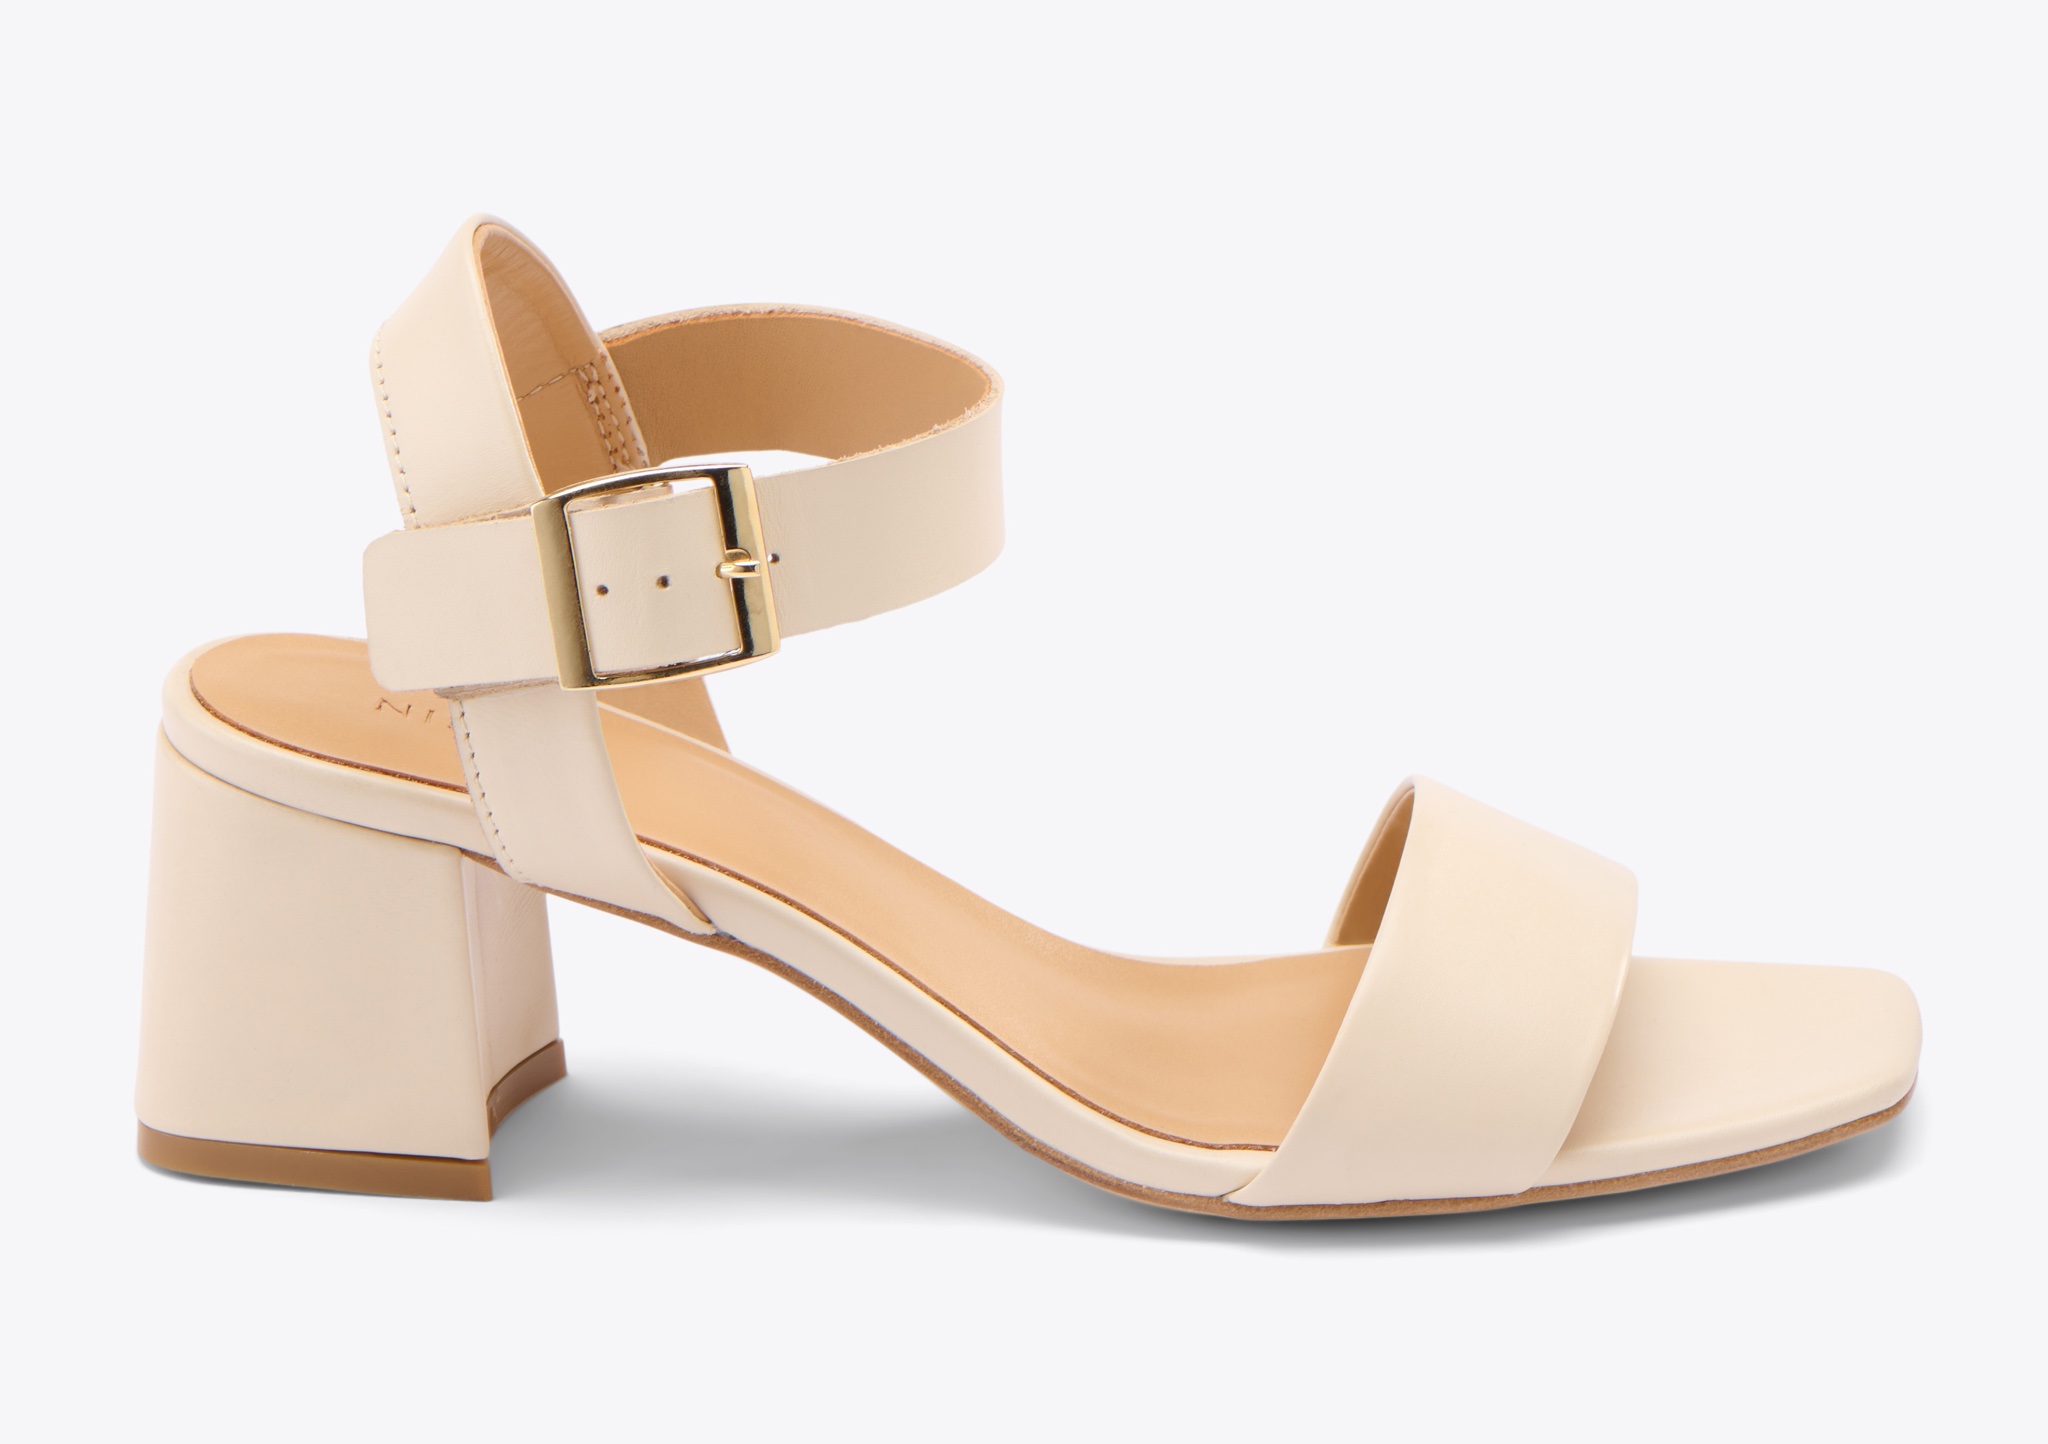 Nisolo Stella Go-To Block Heel Sandal Bone - Every Nisolo product is built on the foundation of comfort, function, and design. 